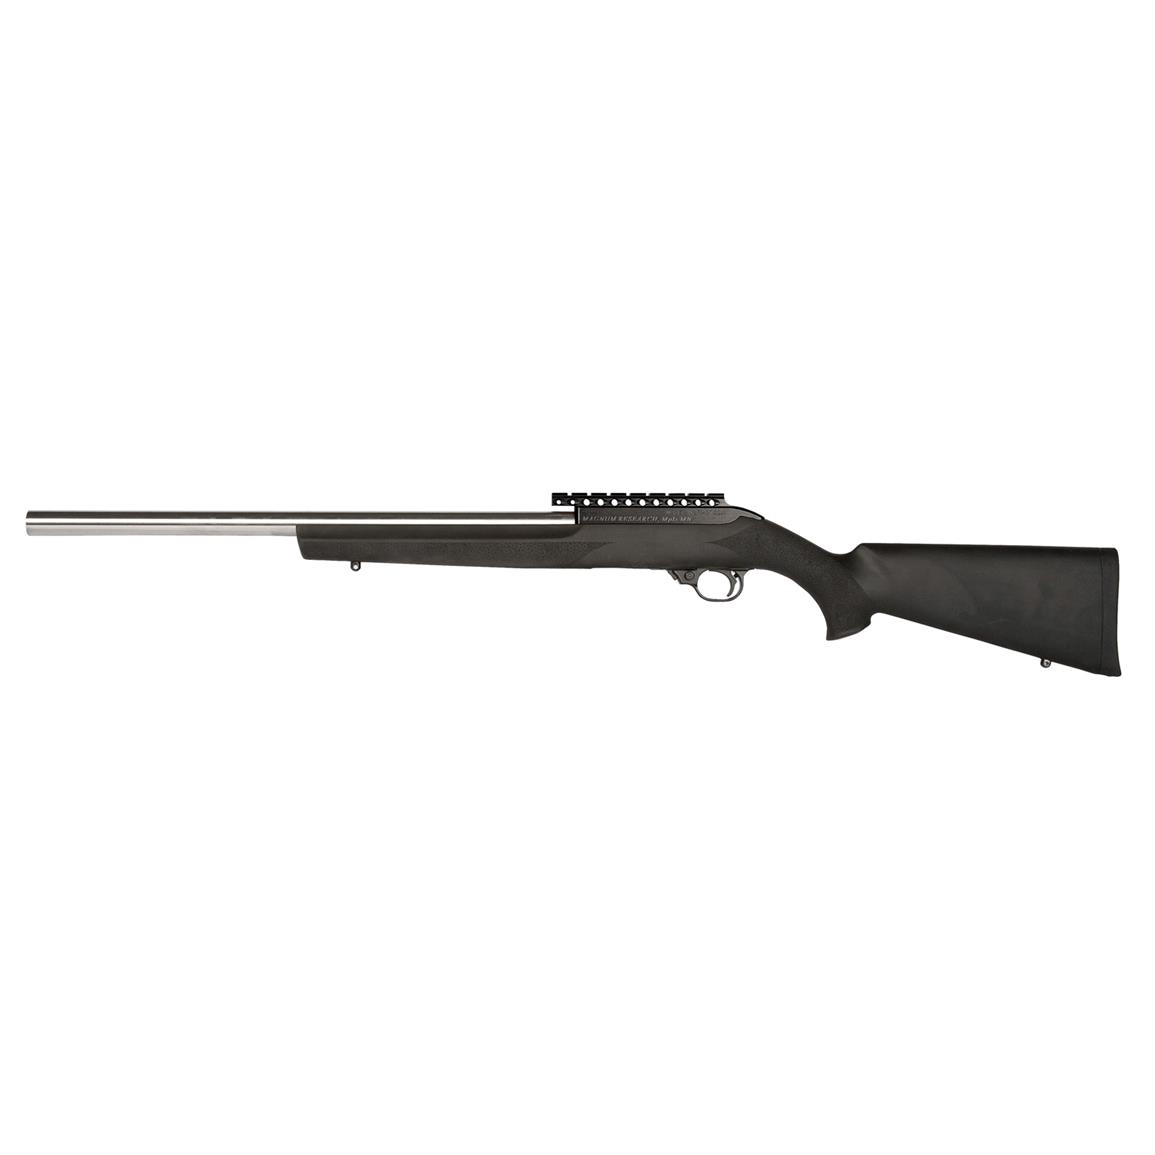 Magnum Research Magnum Lite Stainless Steel, Semi-Automatic, .22 WMR, 18" Barrel, 9+1 Rounds